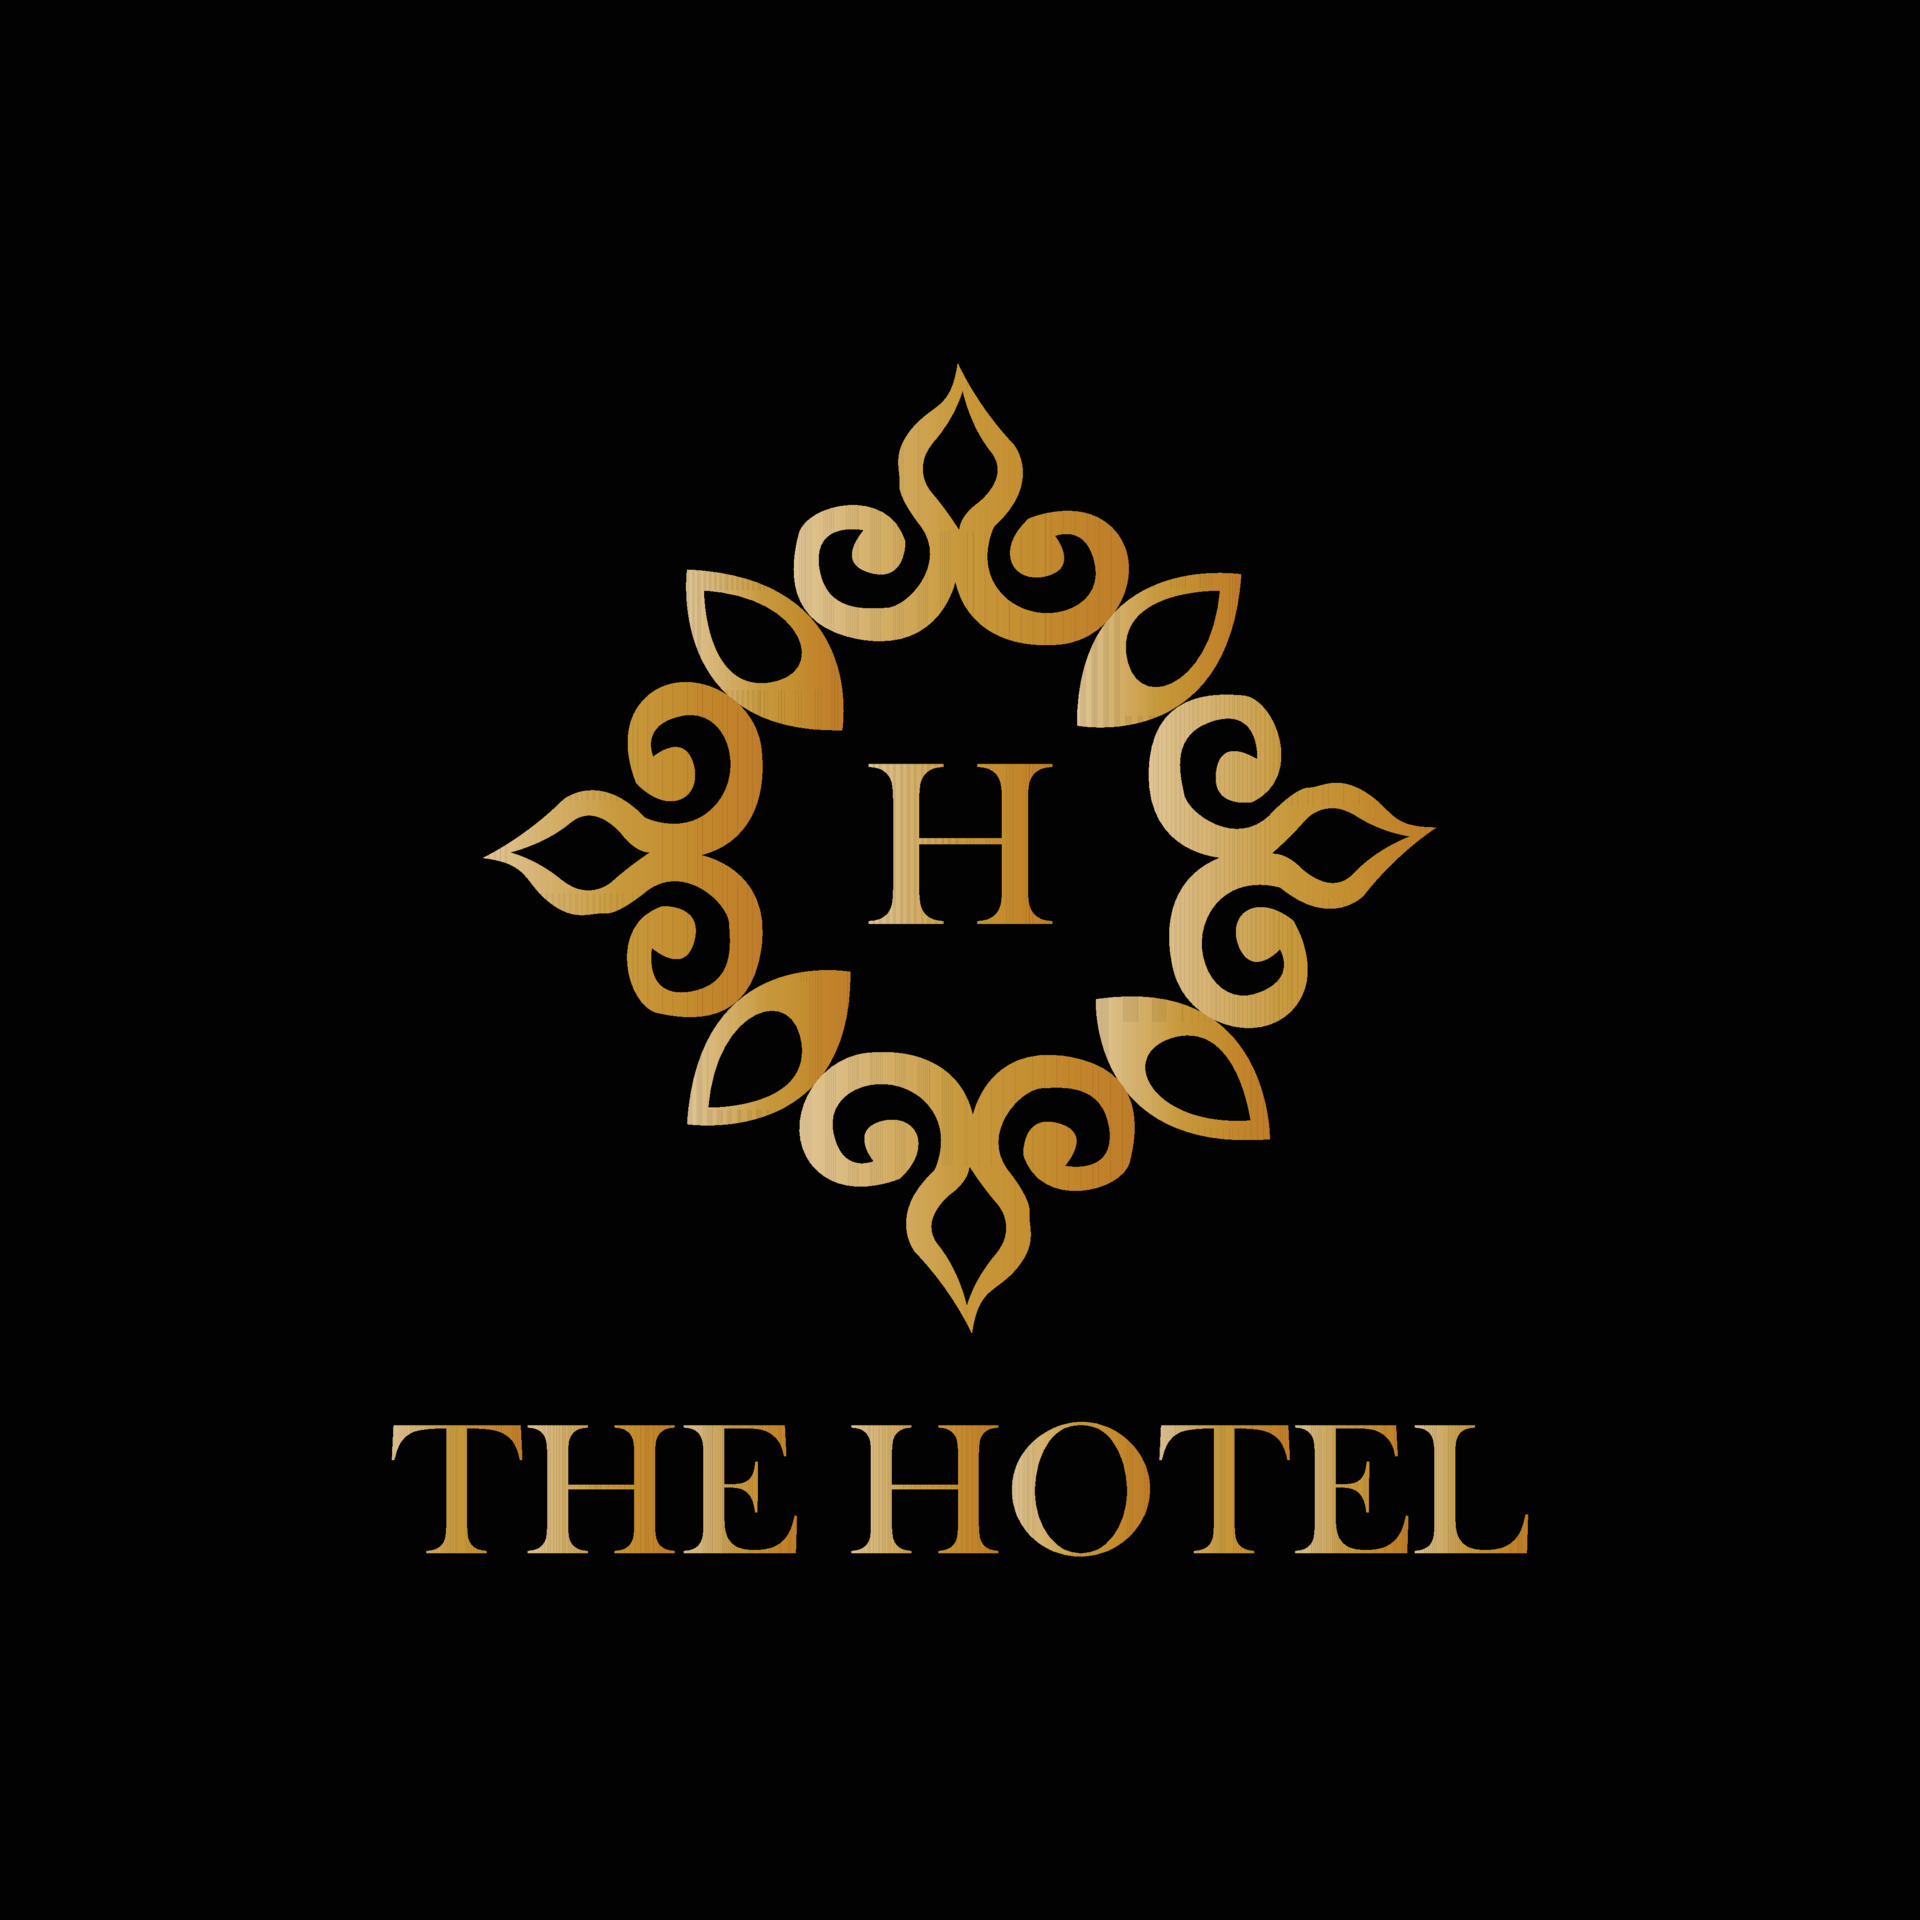 the-hotel-logo-design-by-h-the-hotel-free-vector.jpg